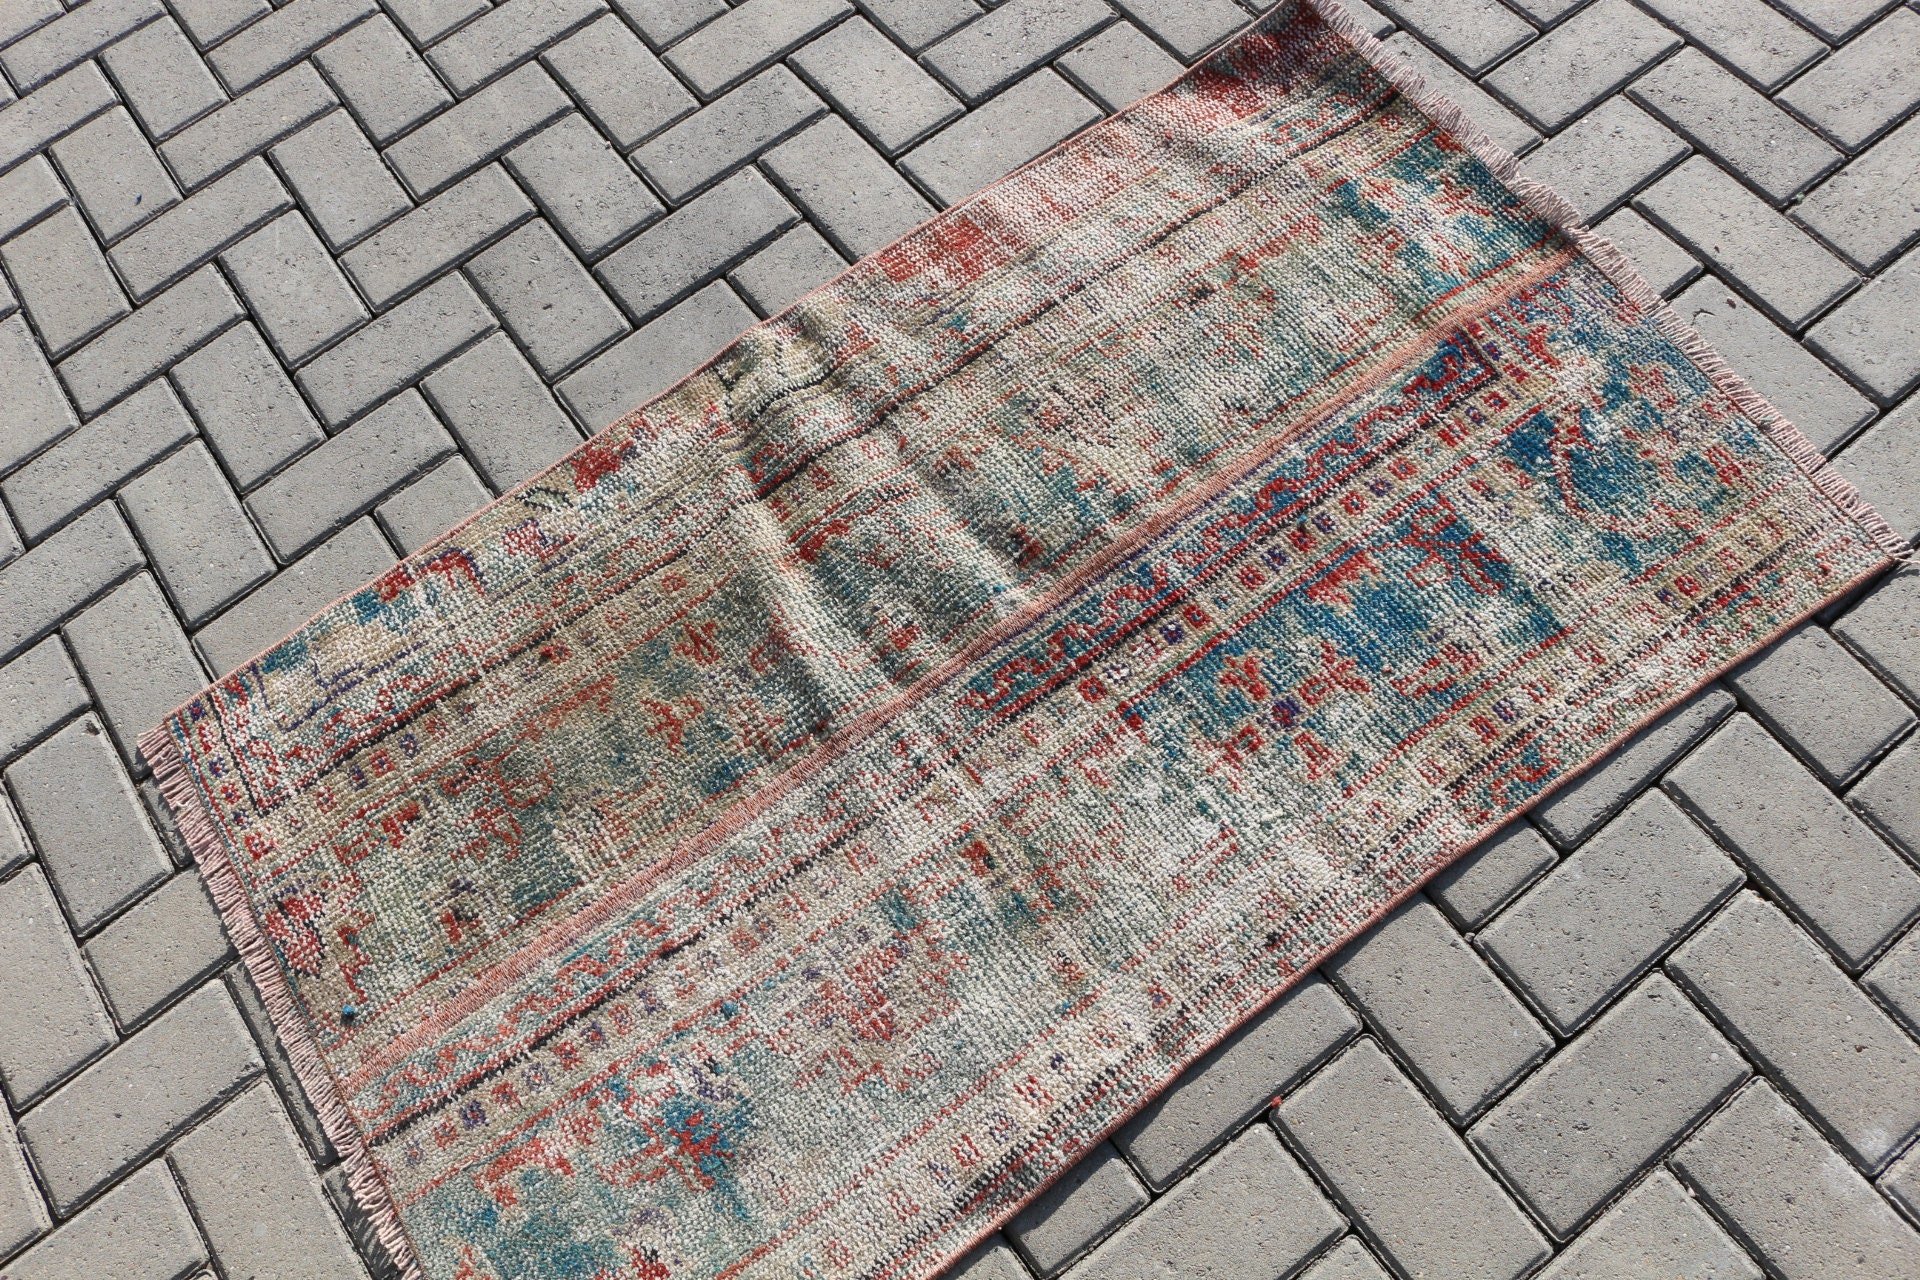 Blue Home Decor Rugs, Entry Rug, Vintage Rugs, 2.6x4.2 ft Small Rugs, Antique Rug, Turkish Rugs, Natural Rugs, Wall Hanging Rug, Floor Rugs